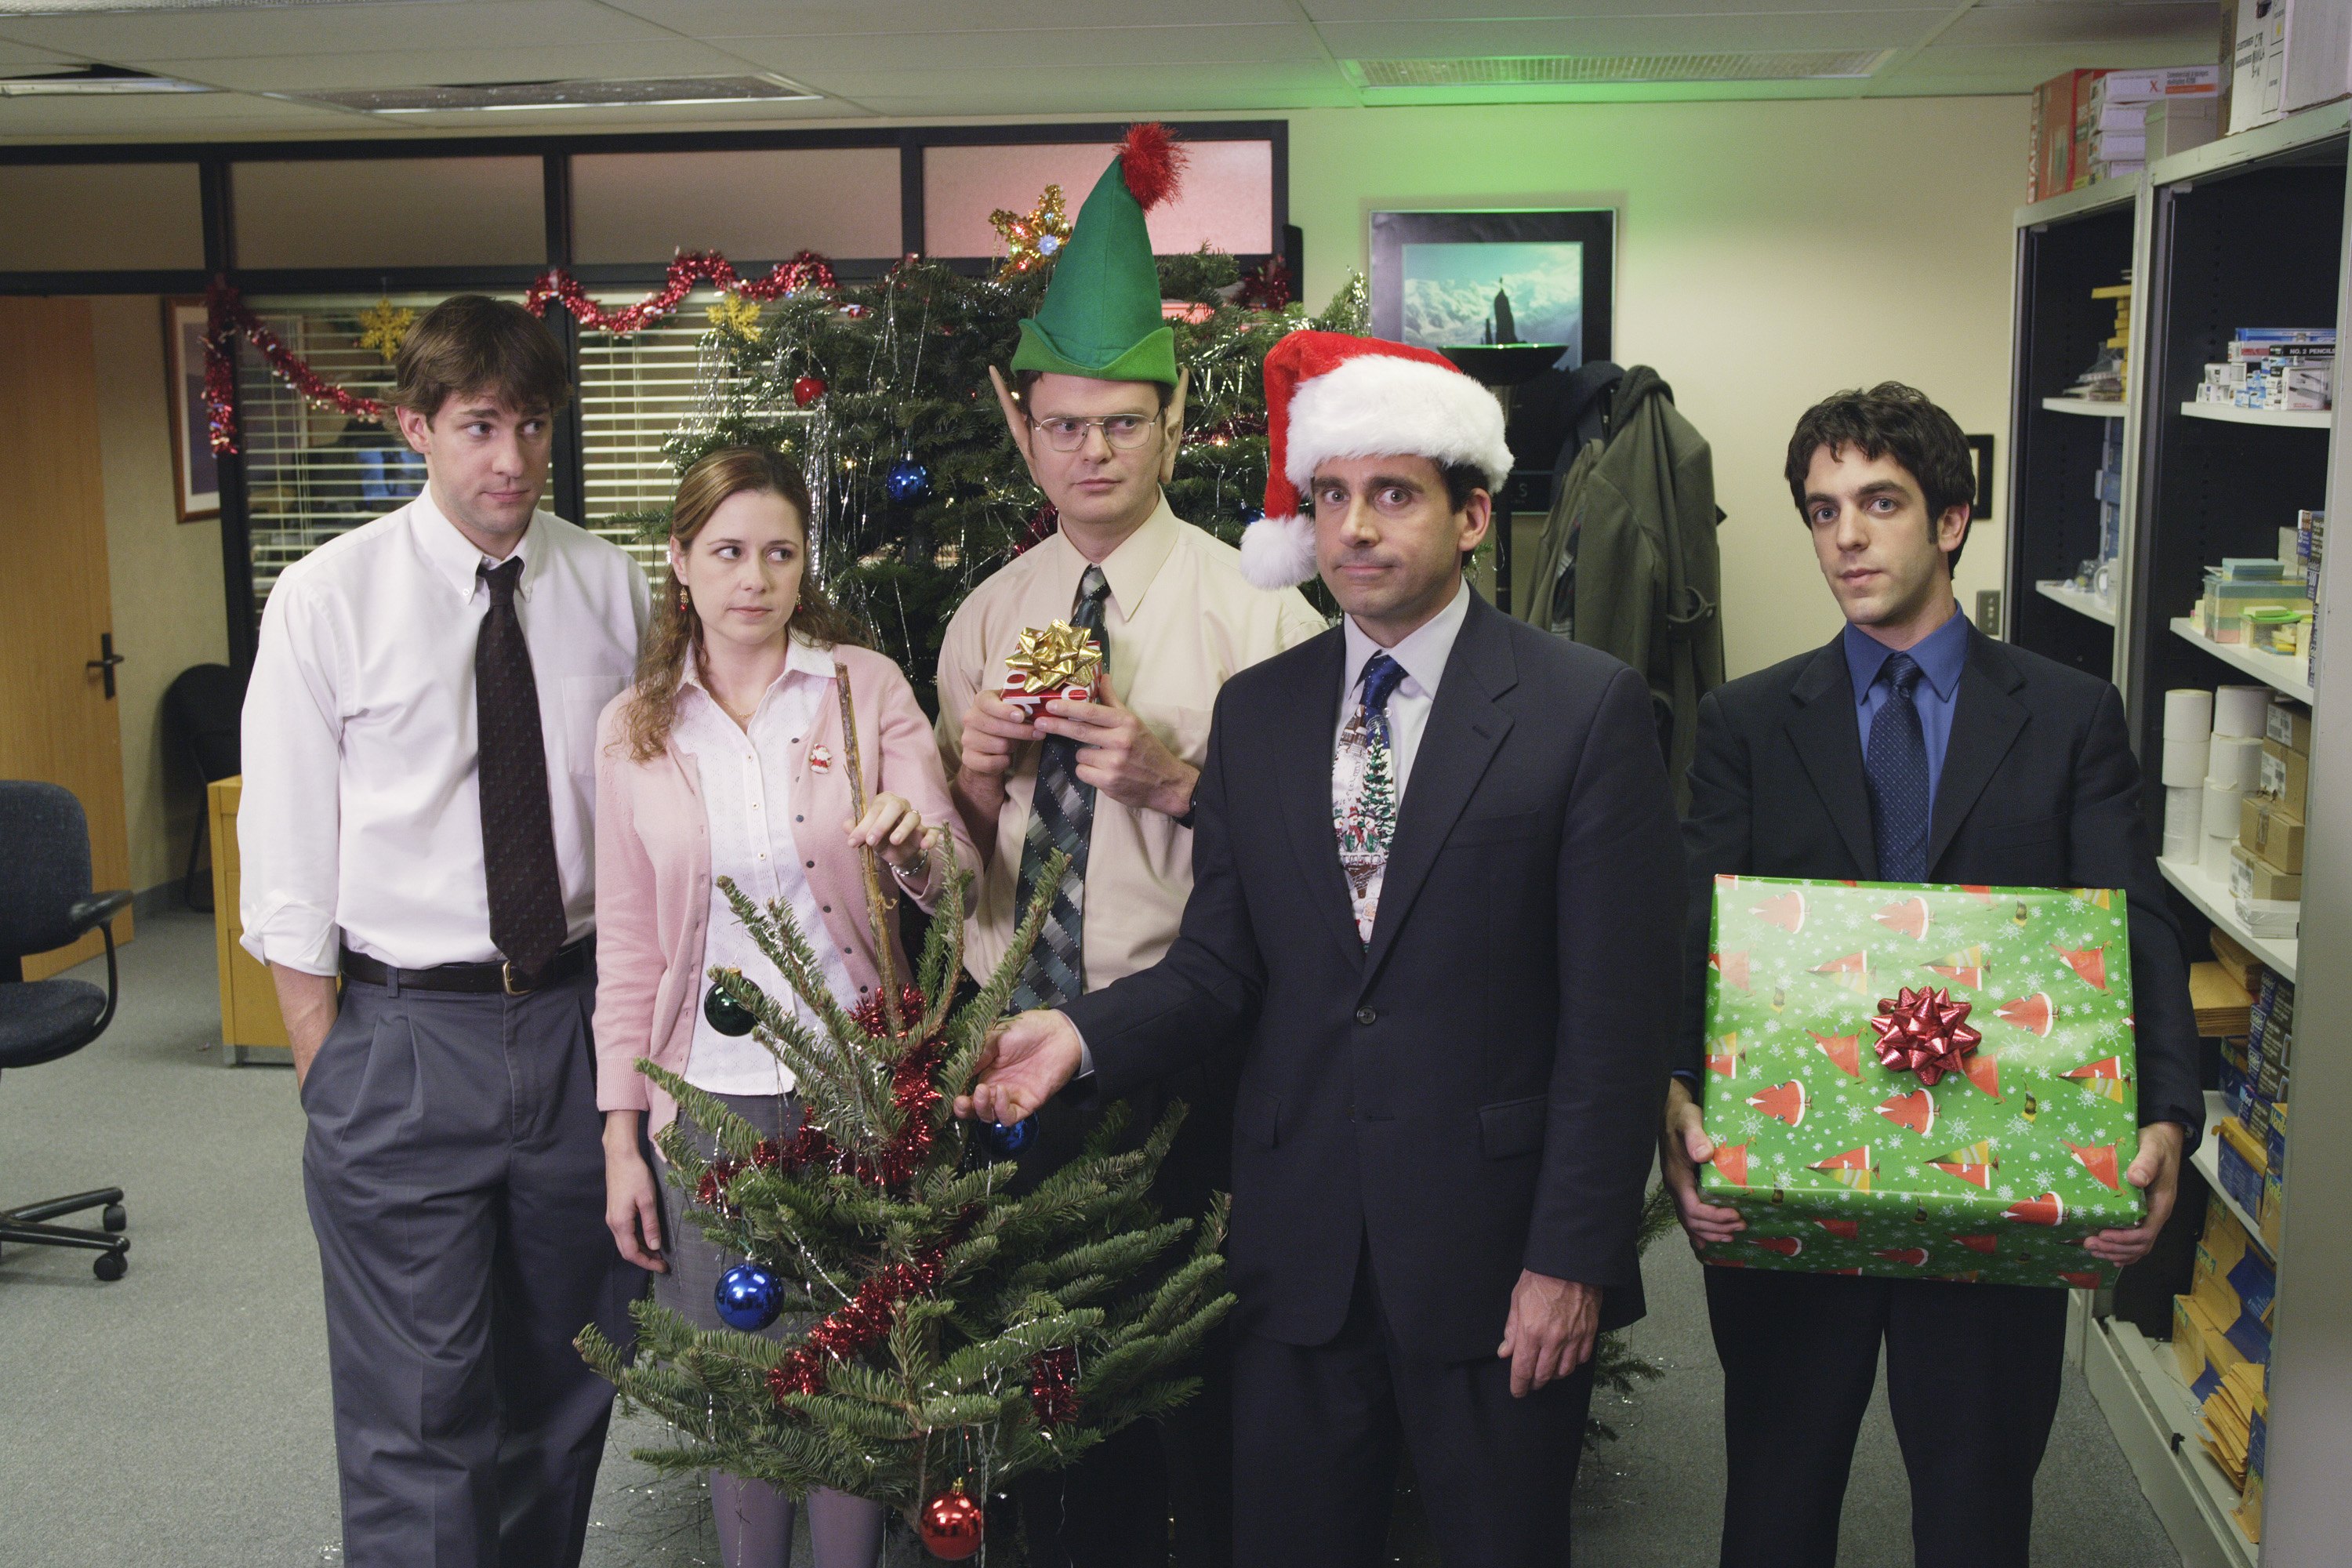 Tips on How to Behave at Office Holiday Parties